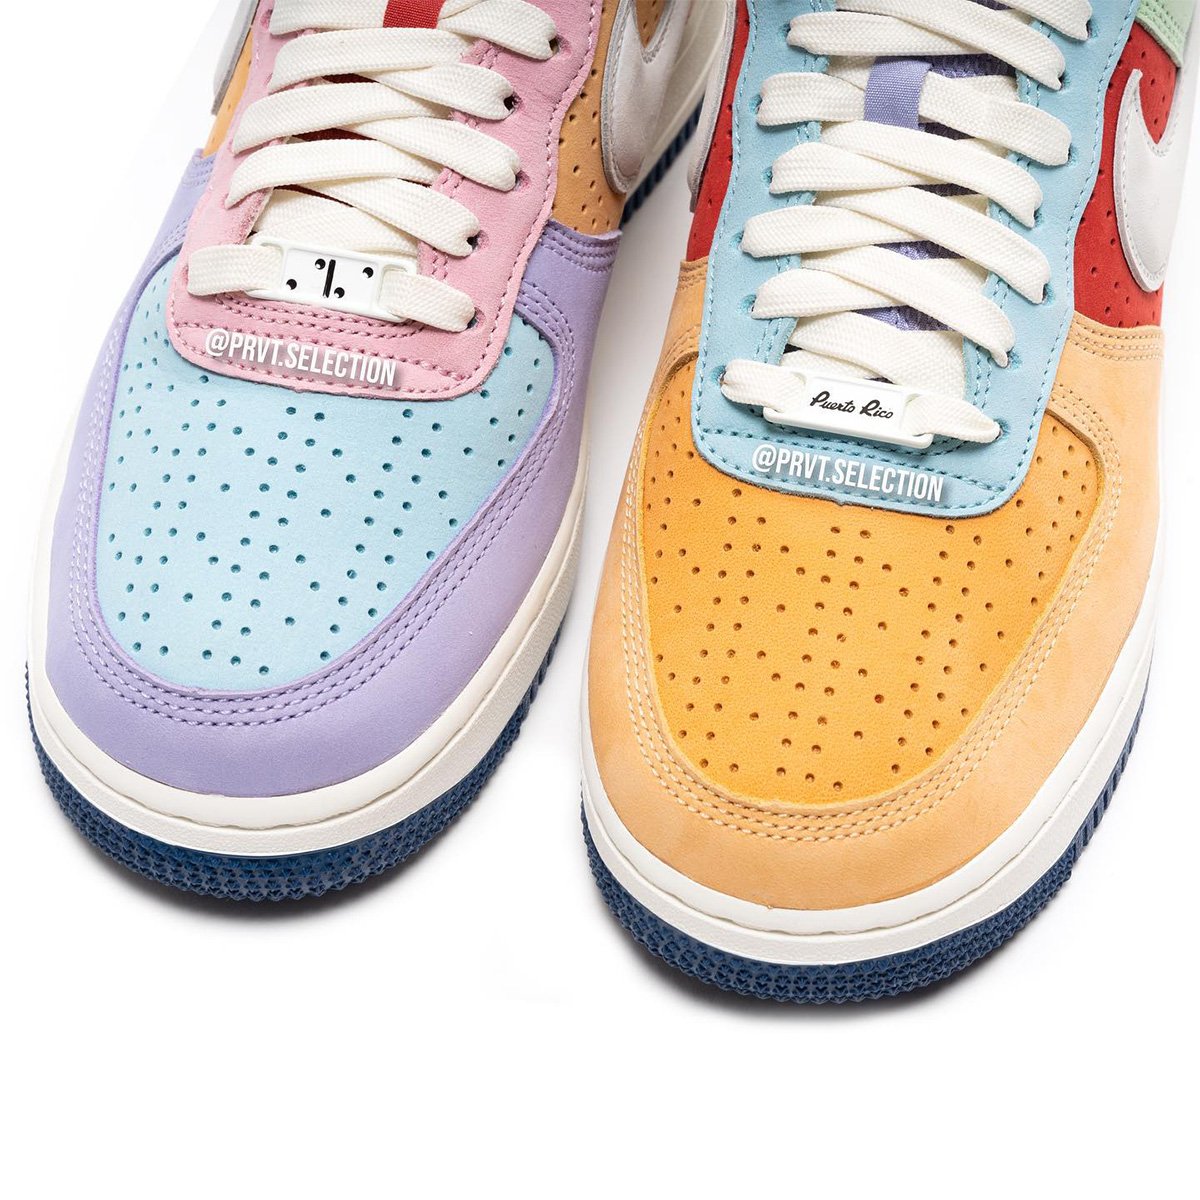 Nike Air Force 1 Low Boricua Puerto Rico DX6504-900 Release Date